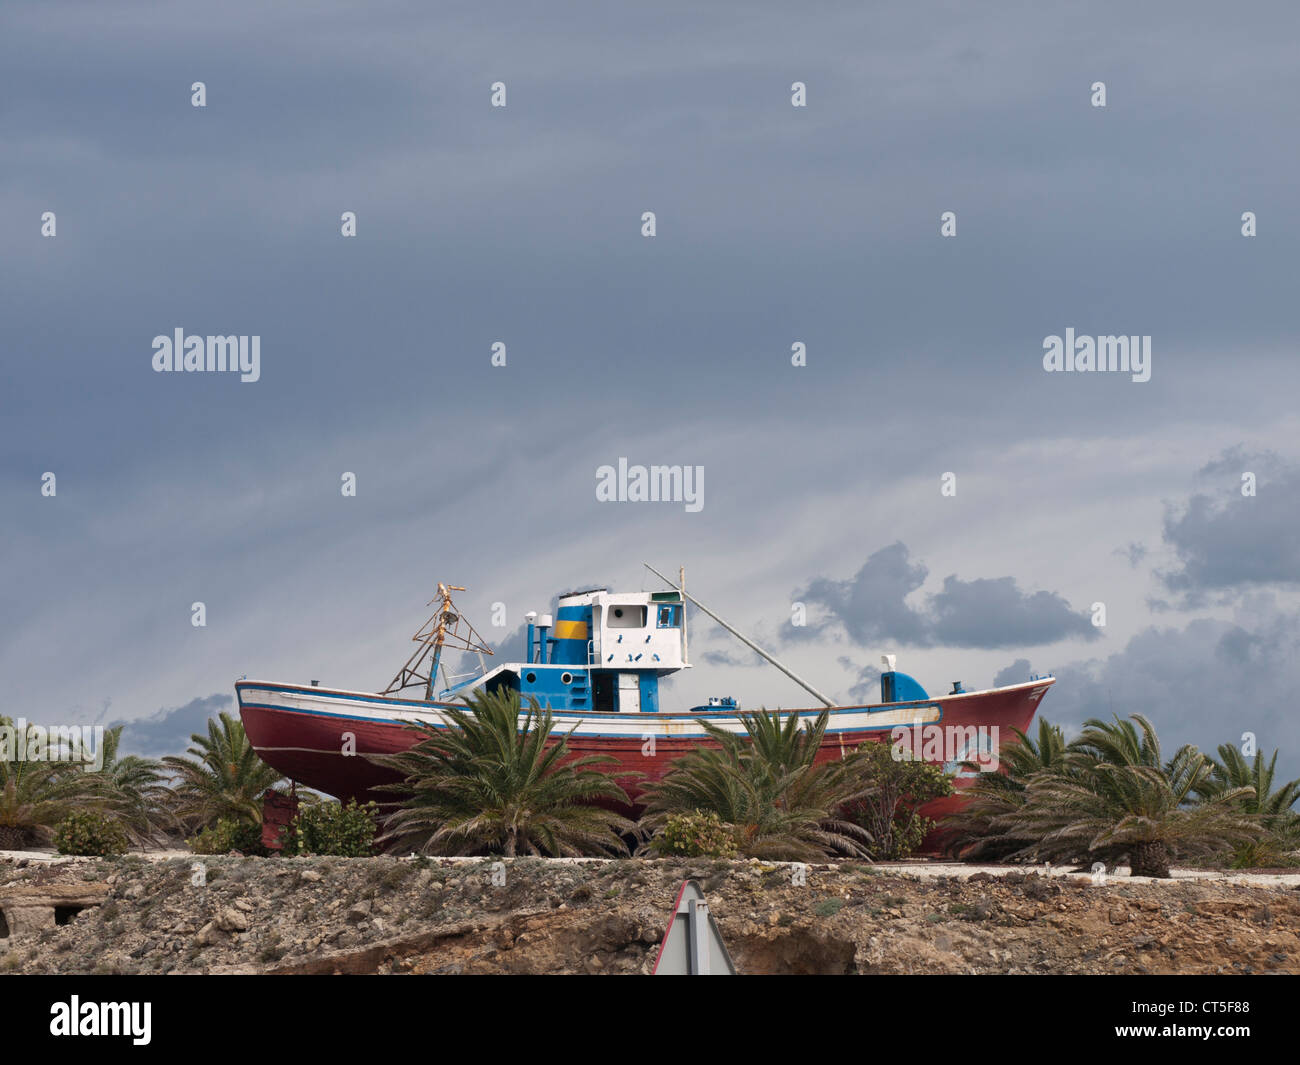 Fishing boat on dry land, decorative element in an intersection on the main highway, seen in Tenerife Spain Stock Photo